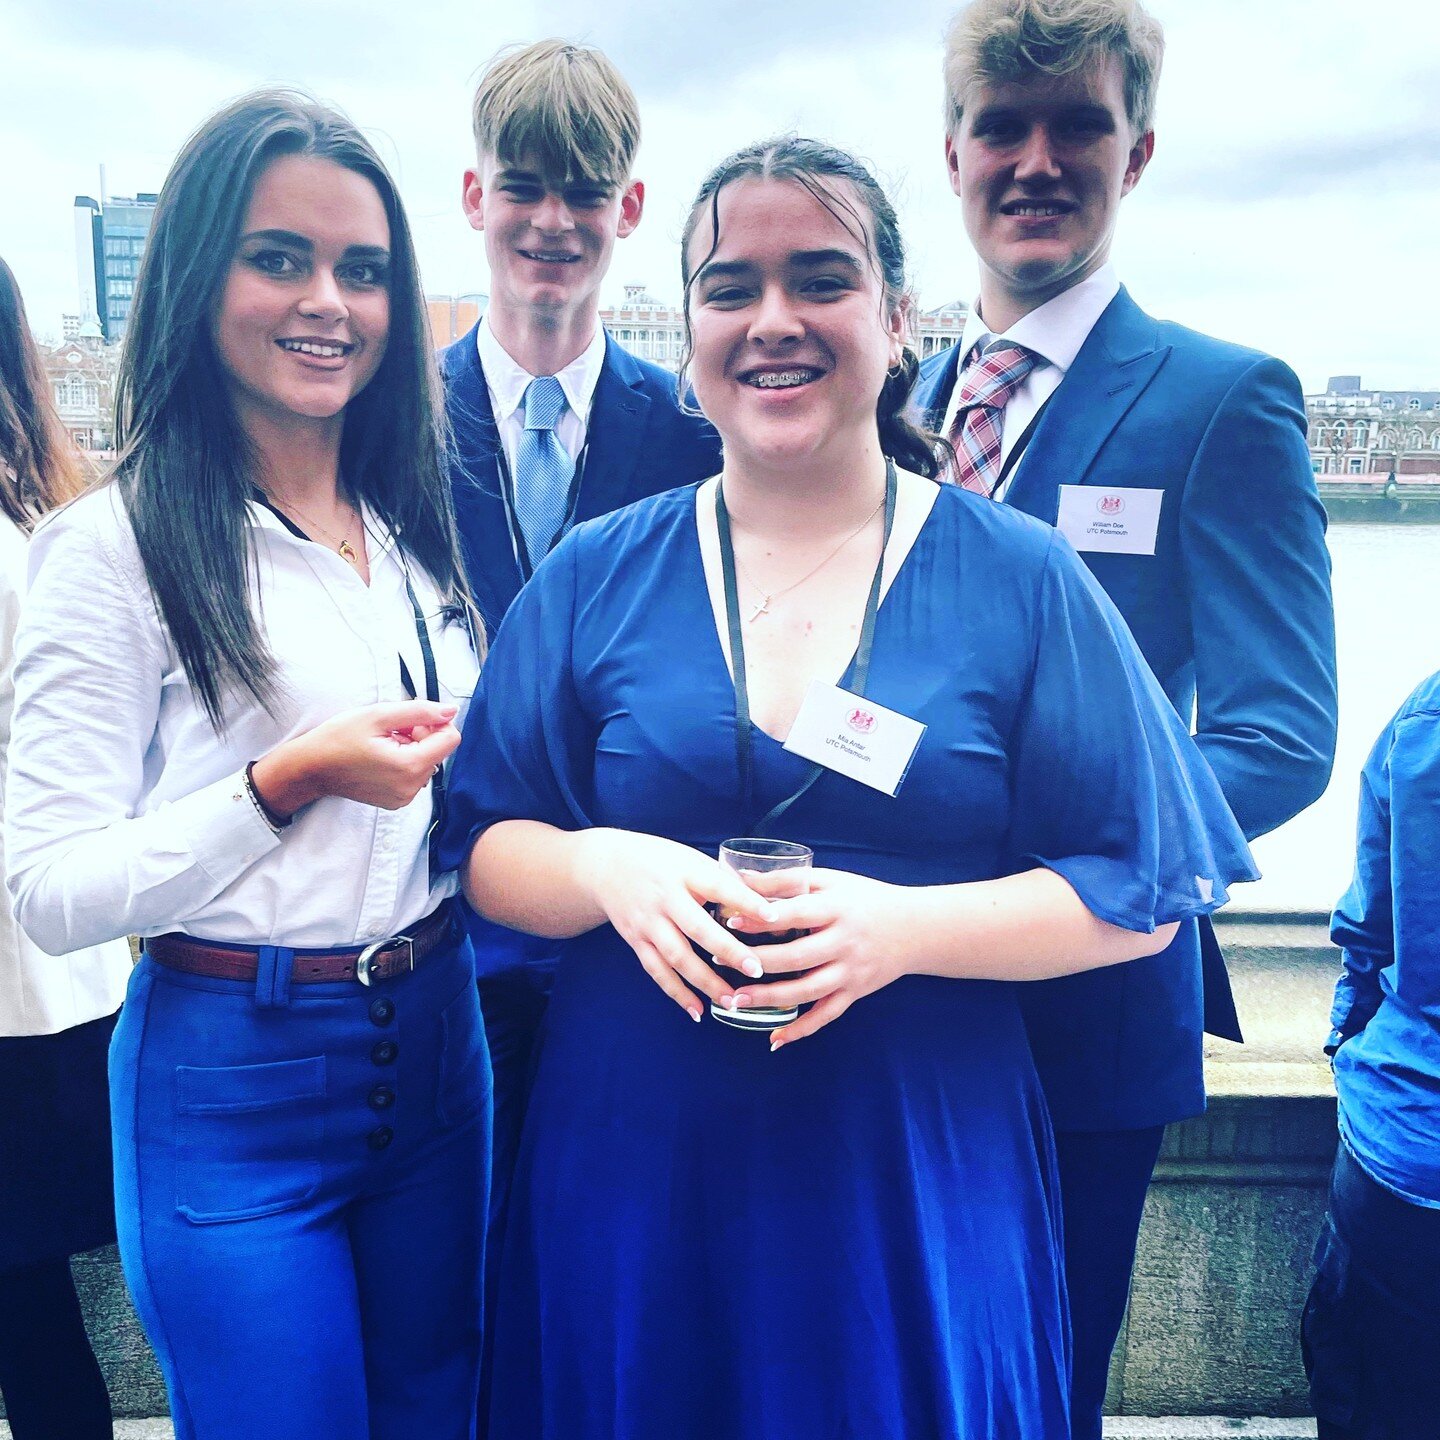 Yesterday three of our Yr12 students visited the House of Lords for a biomedical engineering talk. The talks discussed methods to isolate drug delivery as well as innovations regarding primary response to trauma. Our students presented themselves rea